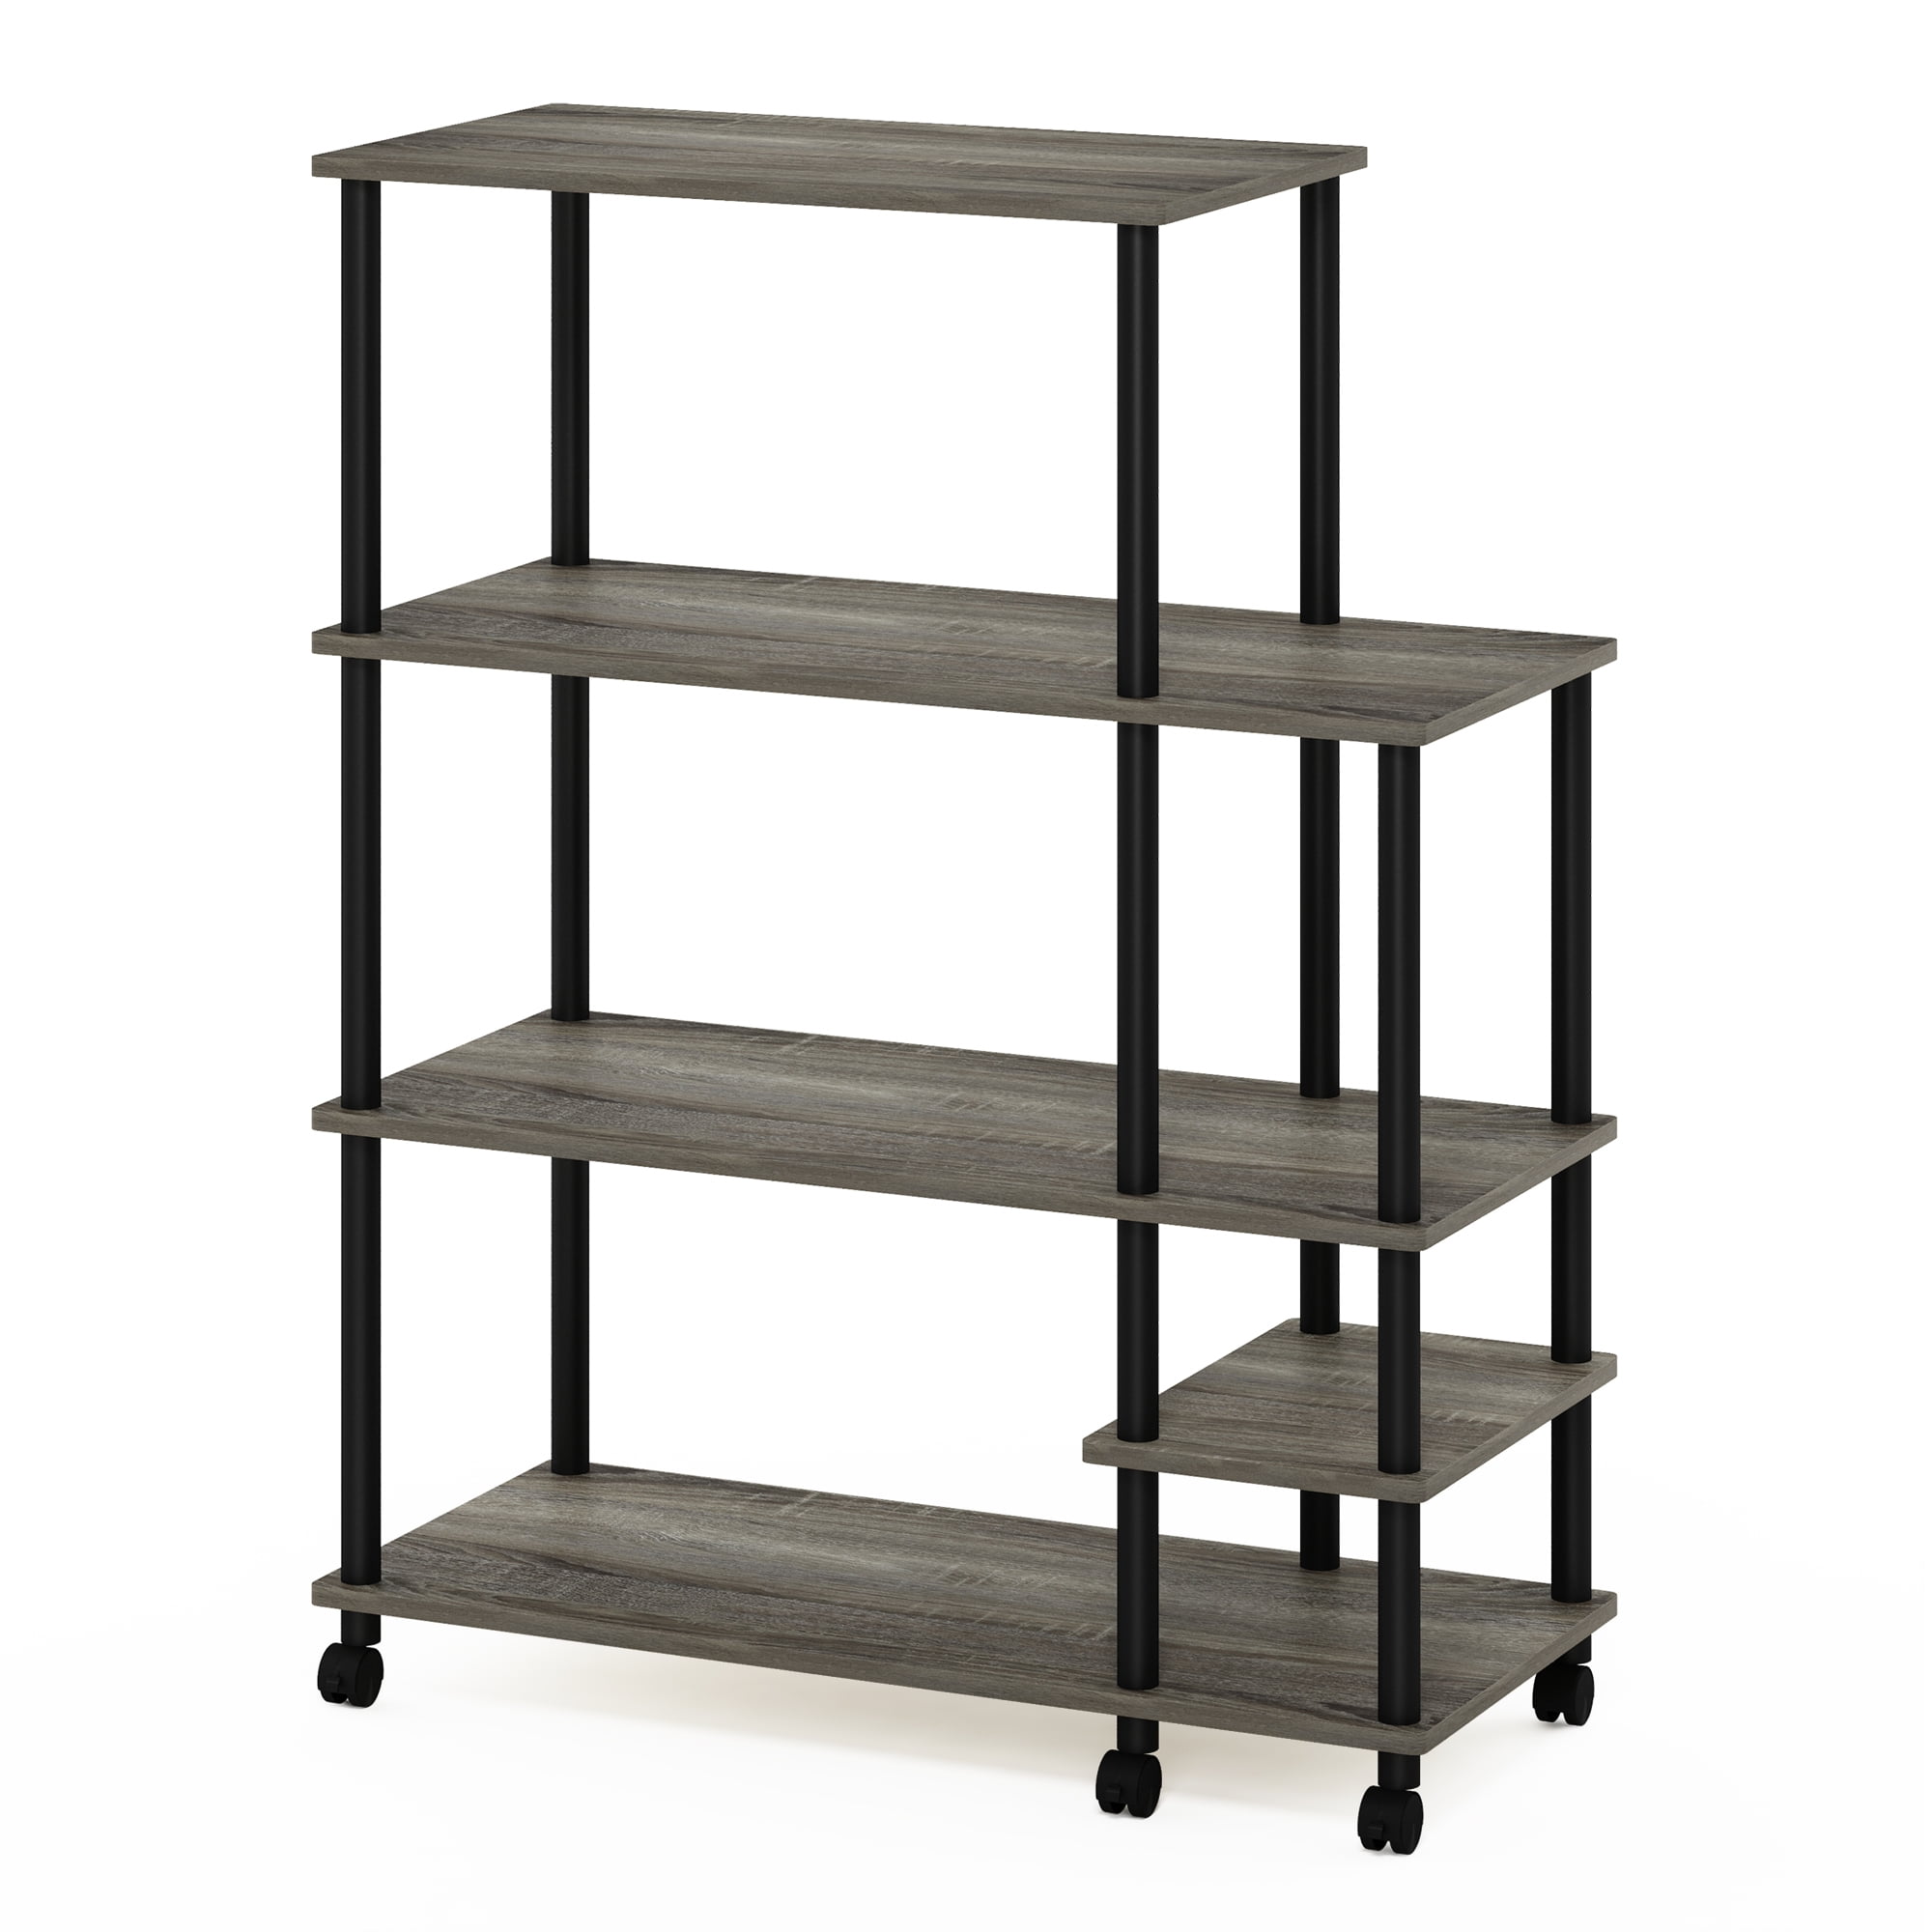 Black/Grey one size Furinno Toolless Shelves Wood 